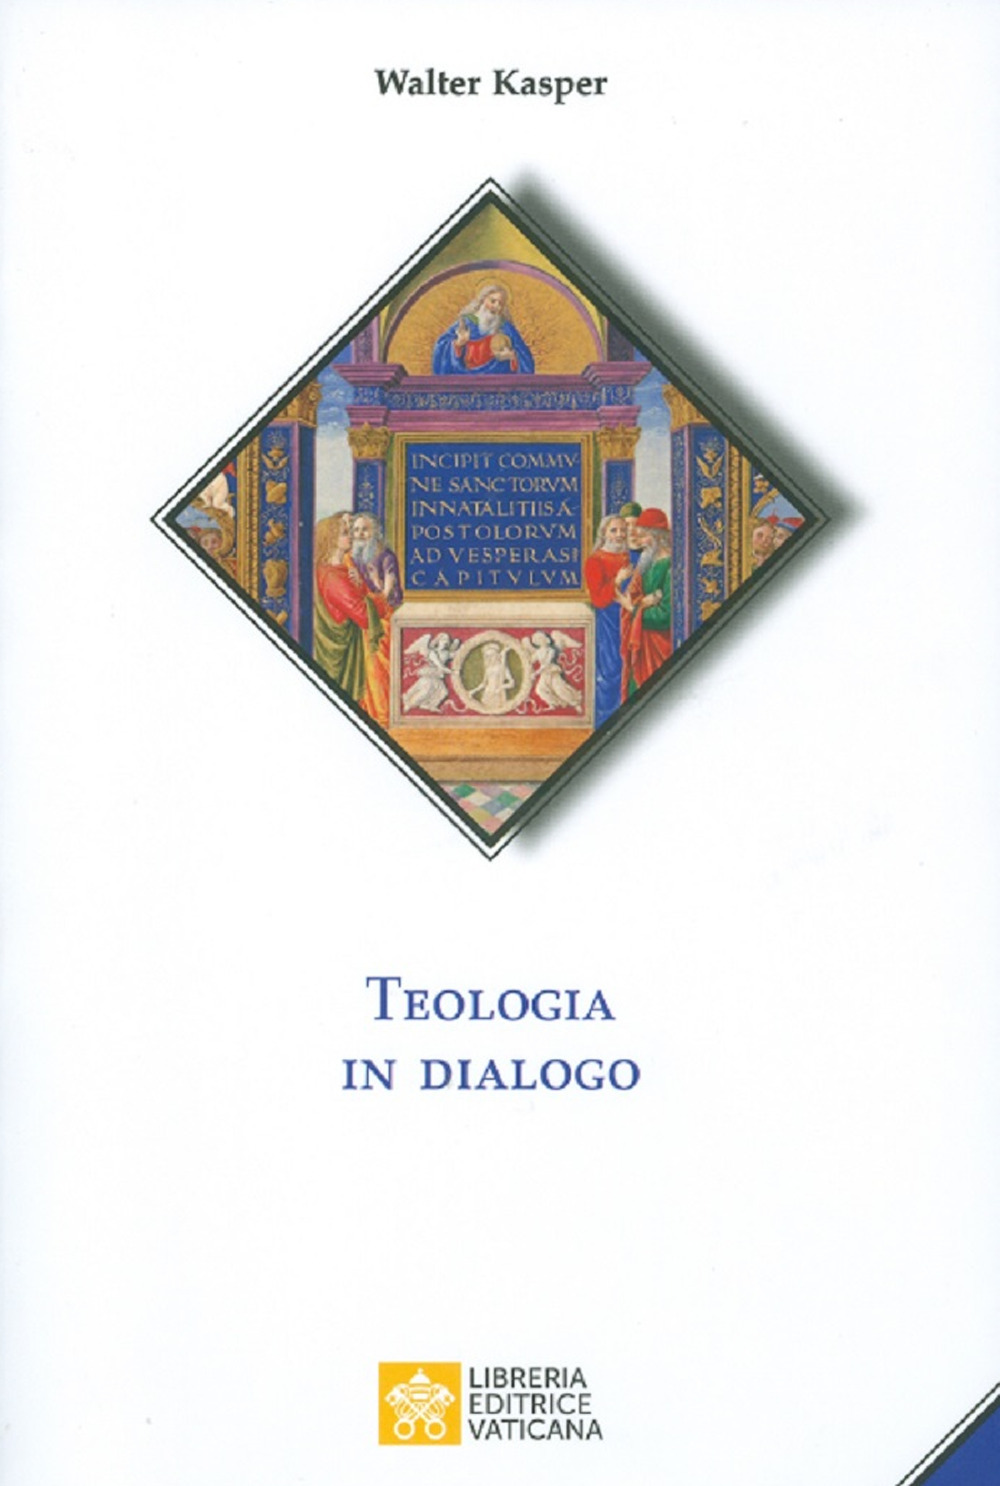 Image of Teologia in dialogo